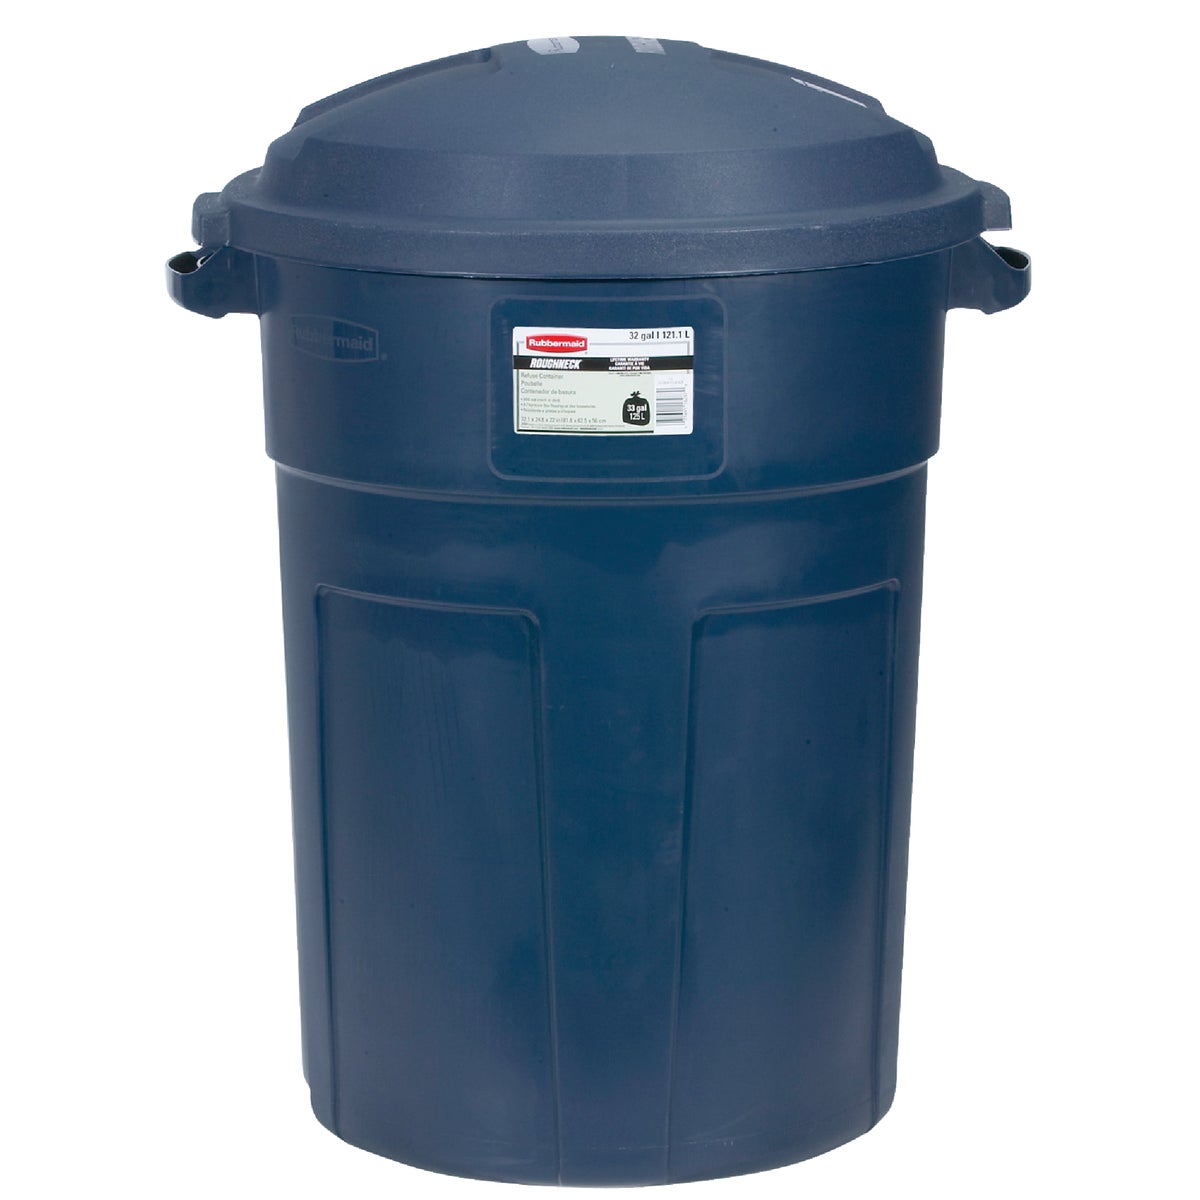 Item 600946, Snap-on lid provides security-locking feature that locks in odors and locks